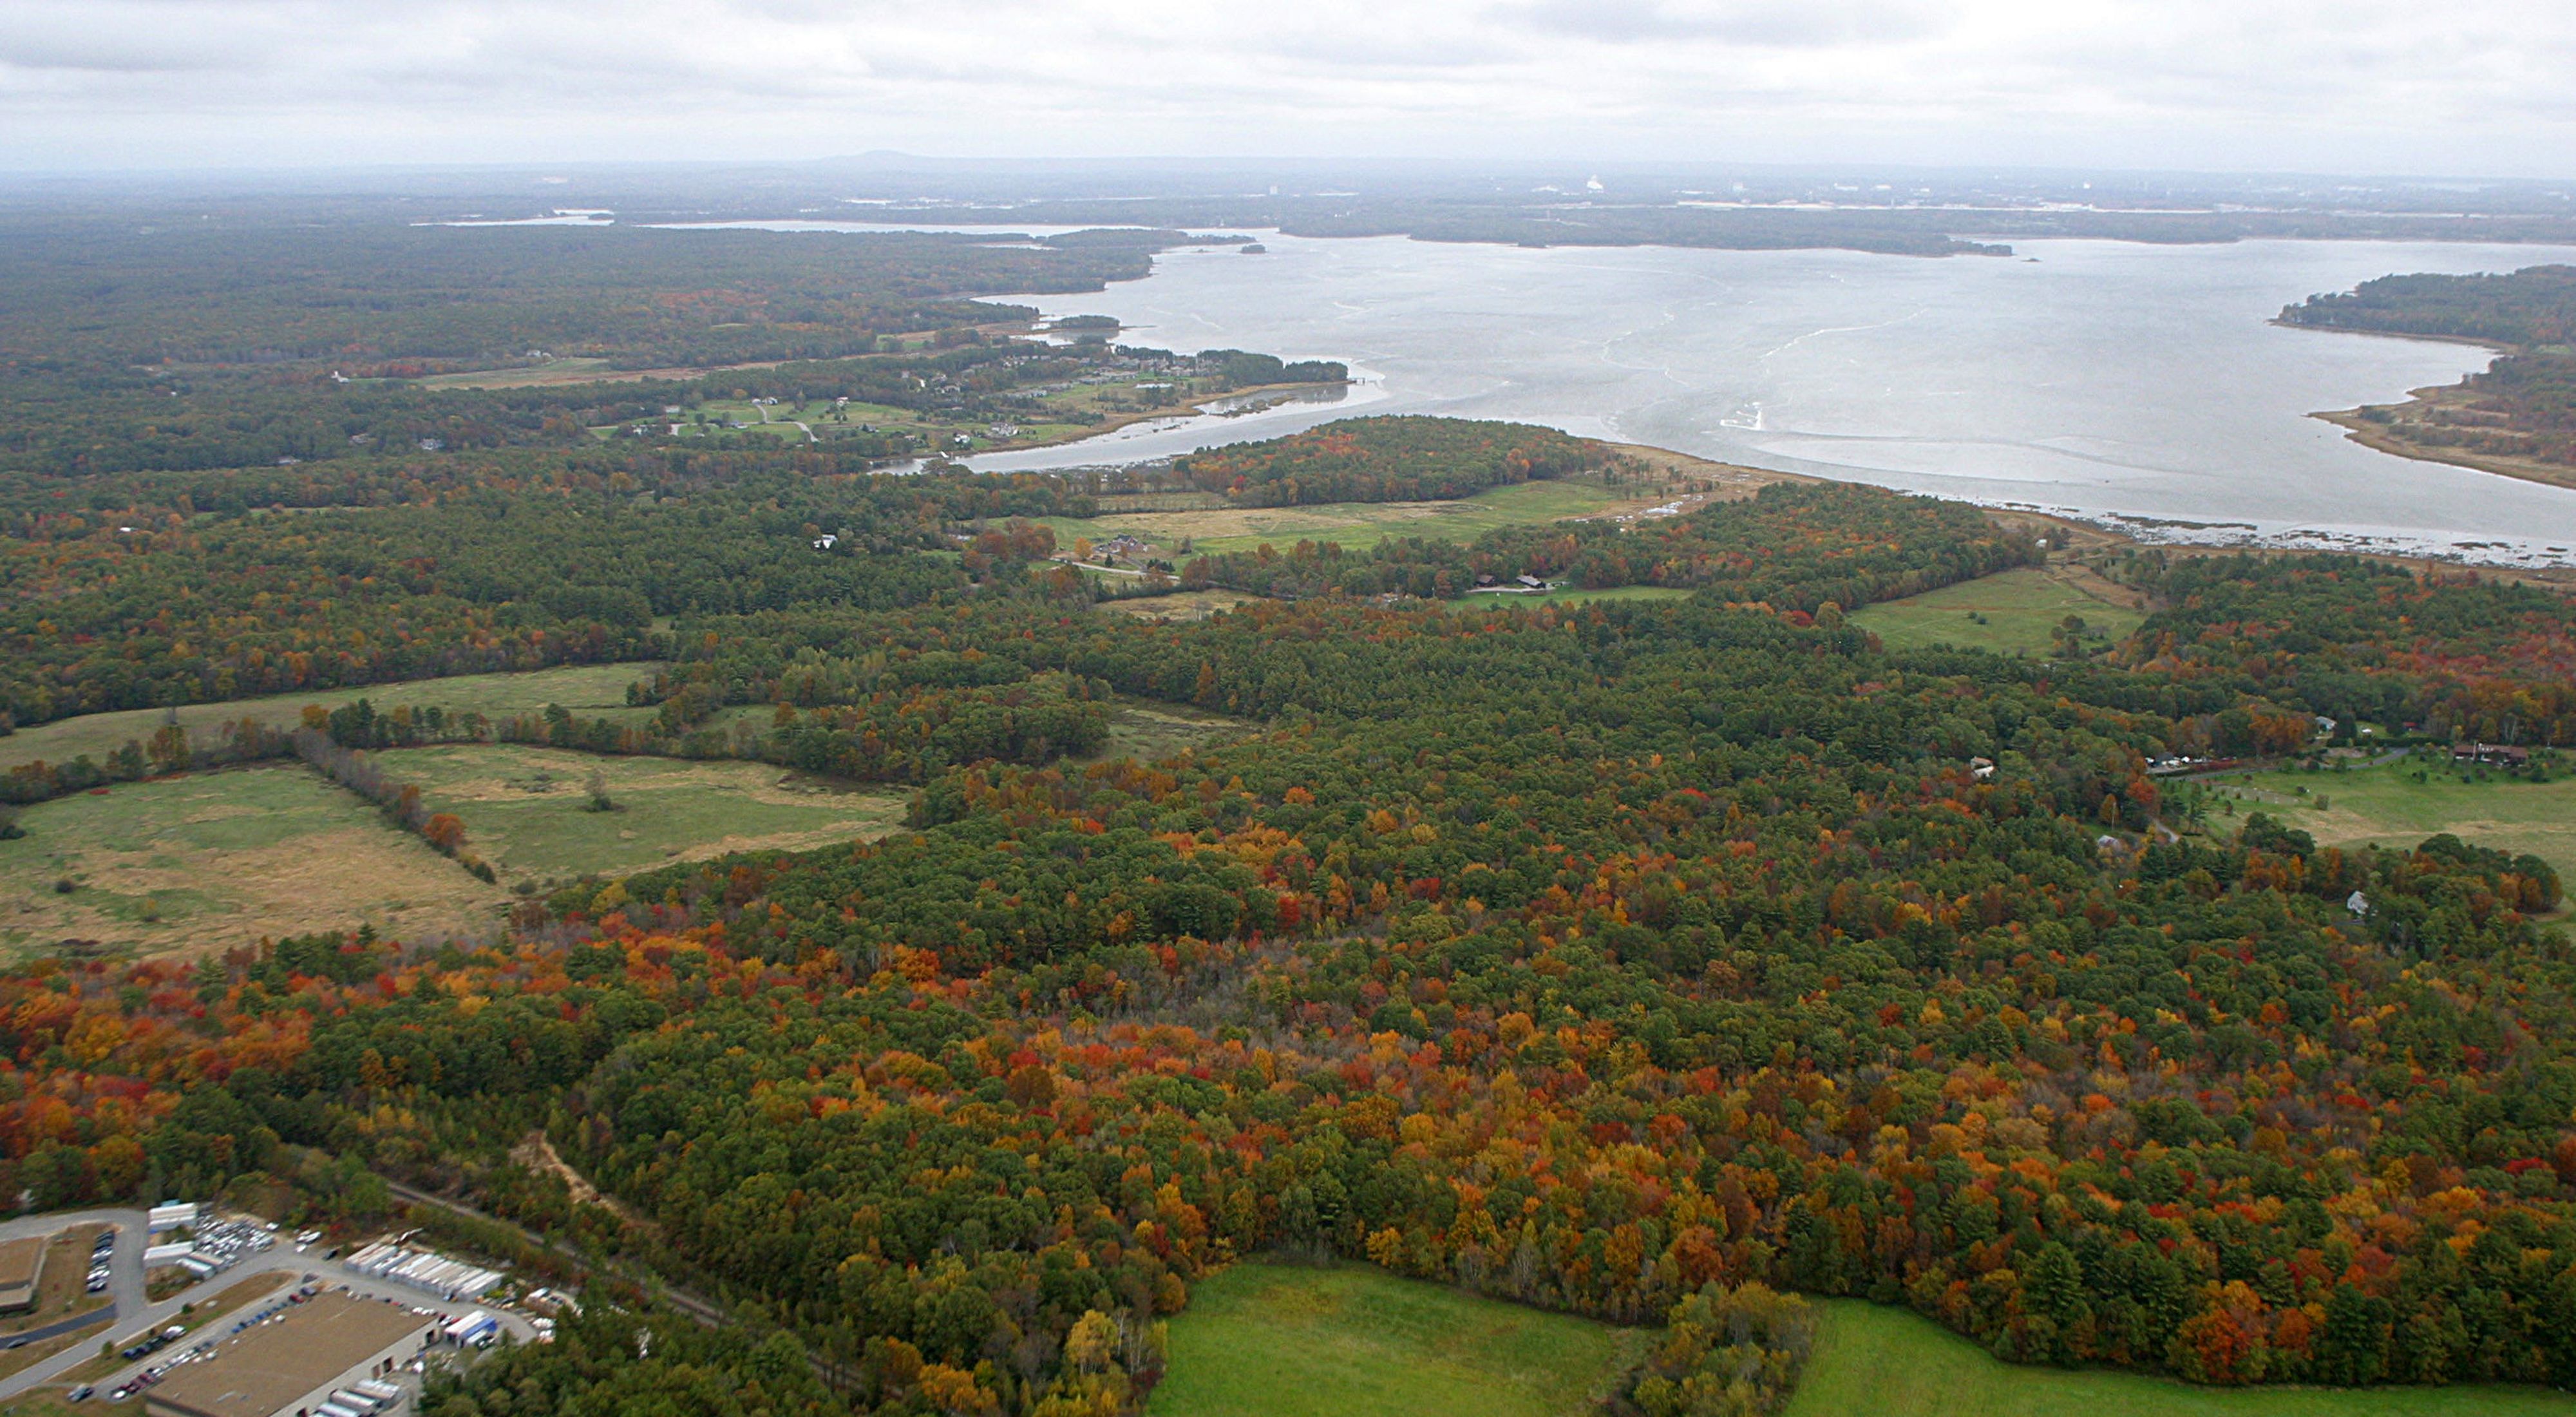 View from a plane looking out over an estuary in the background with trees just starting to show fall colors in the foreground. 